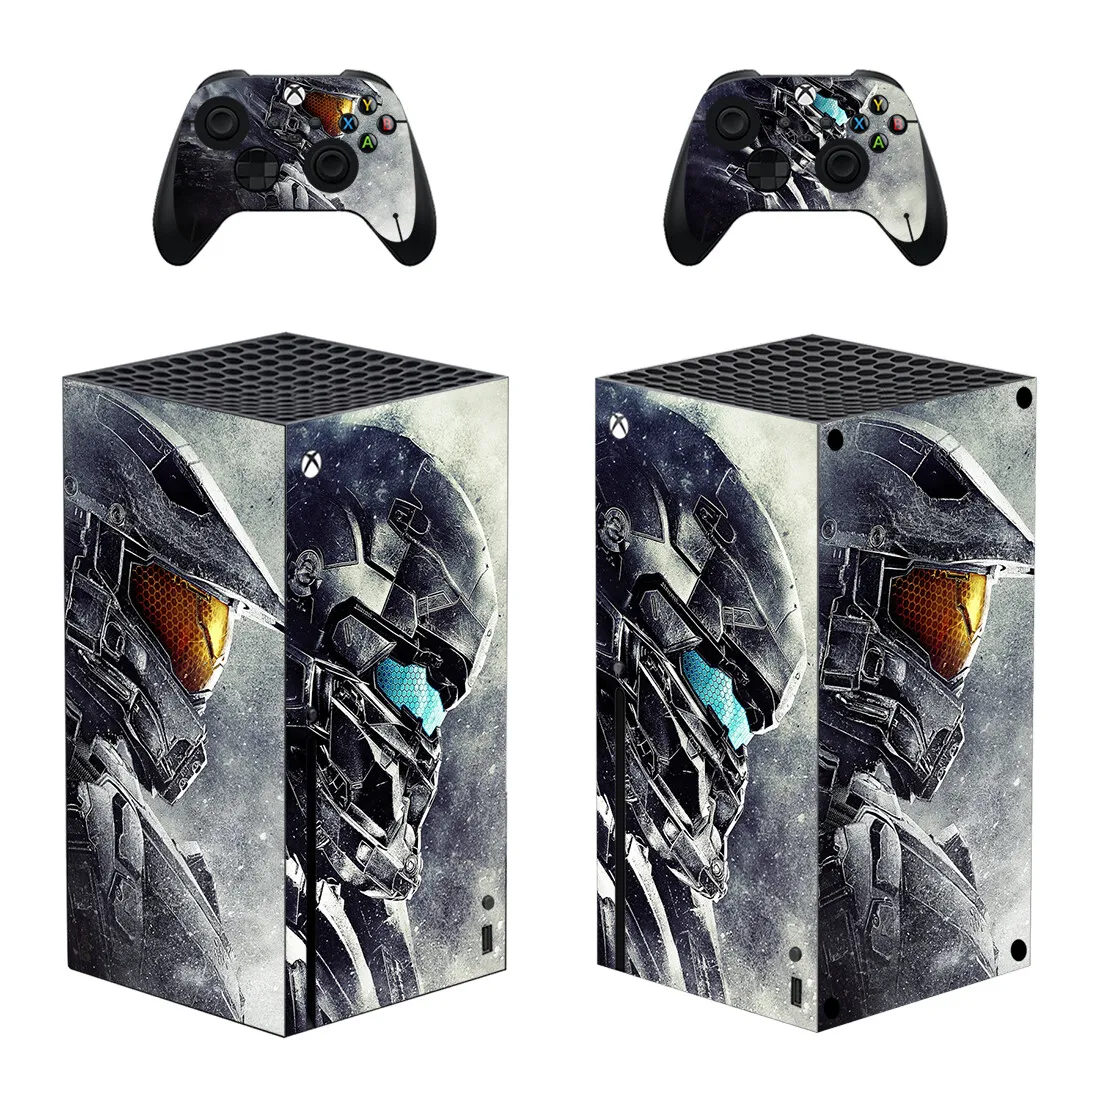 

New Warfare Protector Sticker Decal Cover for Xbox Series X Console and Contracoller XSX Skin Sticker Vinyl